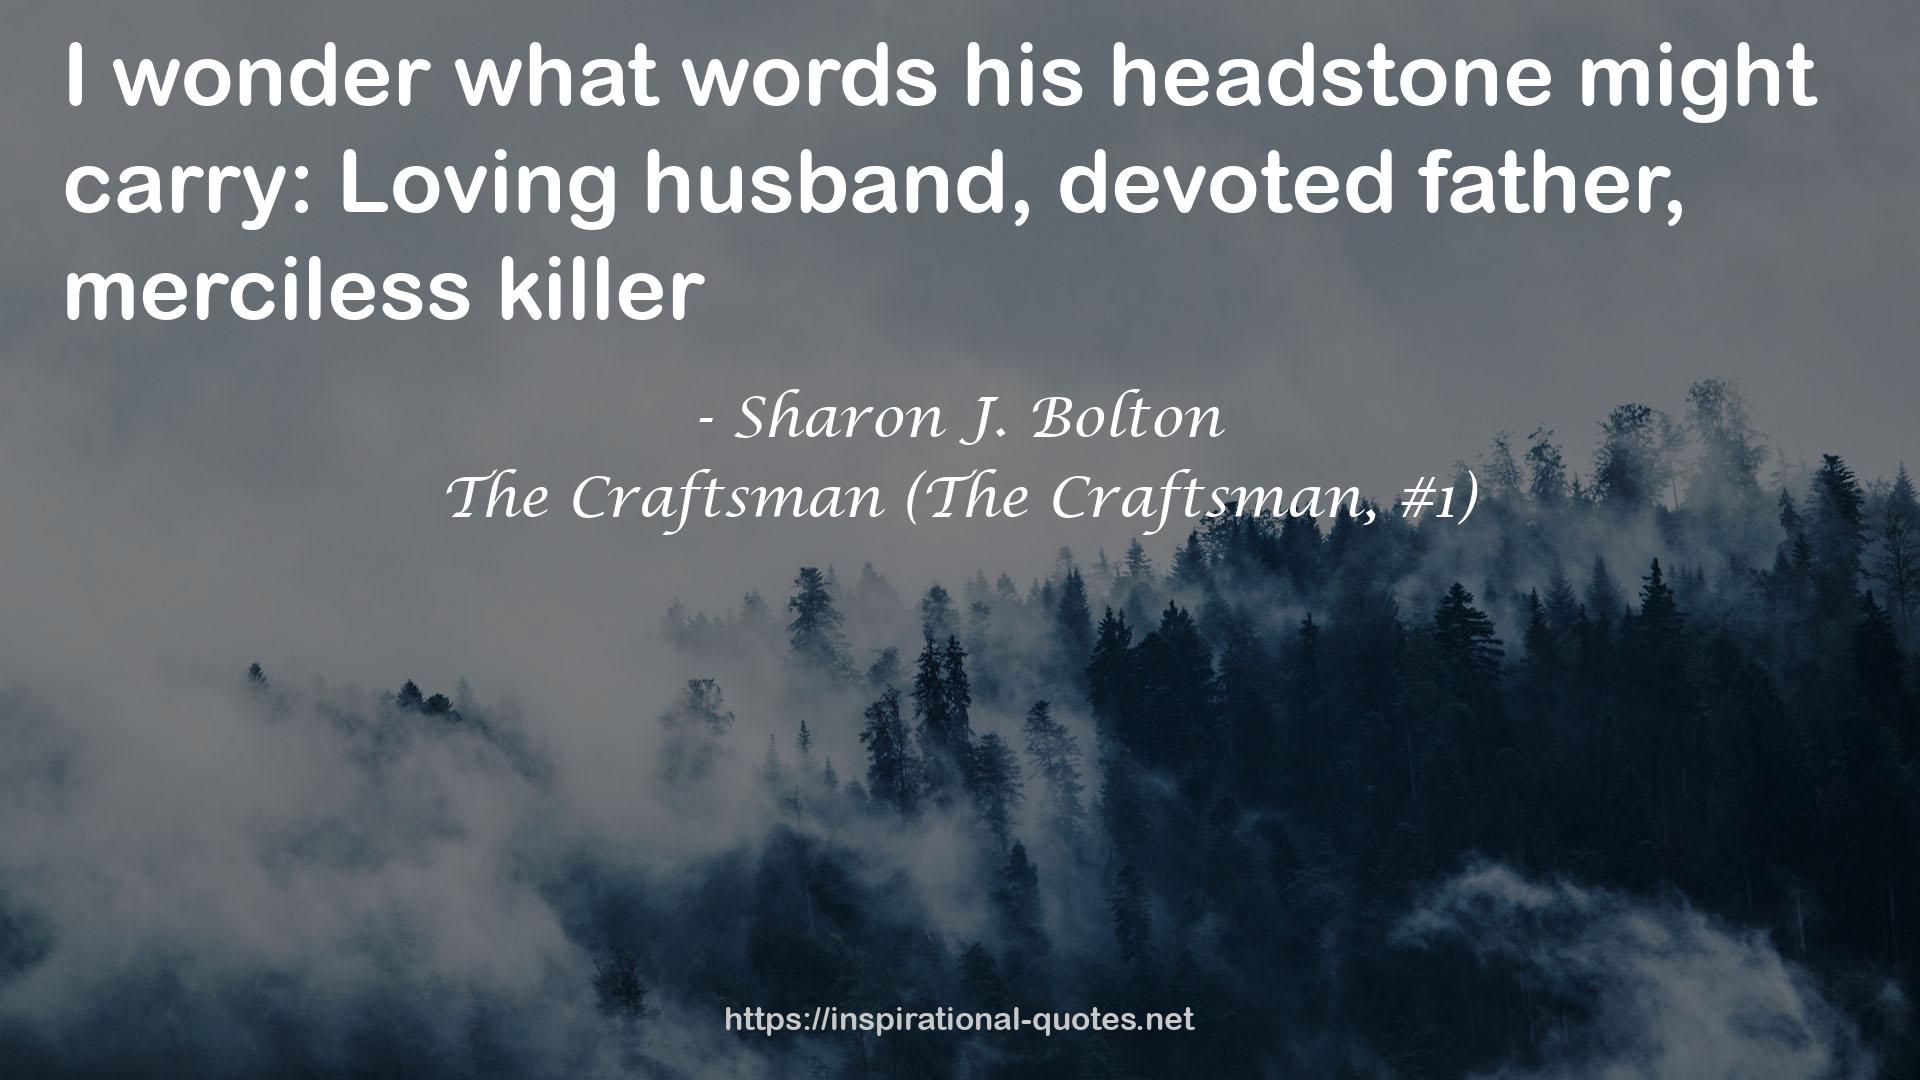 The Craftsman (The Craftsman, #1) QUOTES